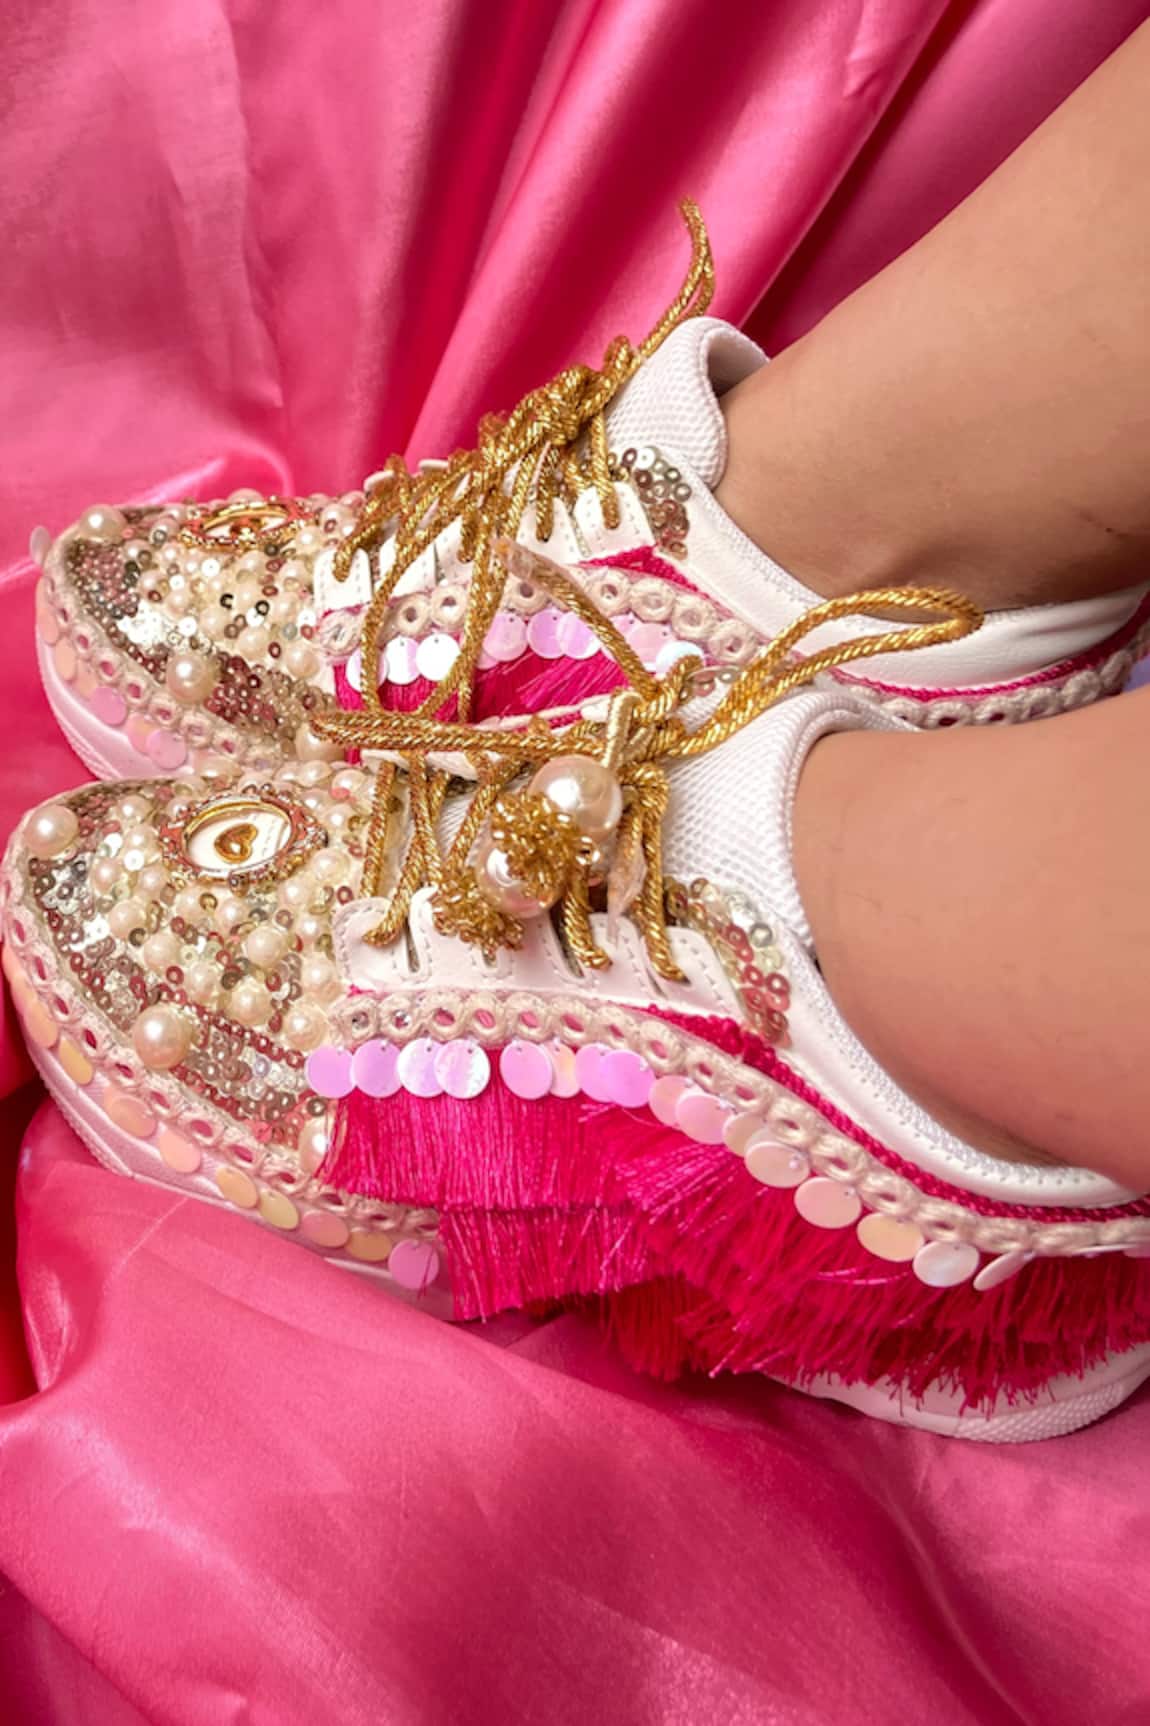 Trending: Brides Who Ditched Heels And Wore Sneakers